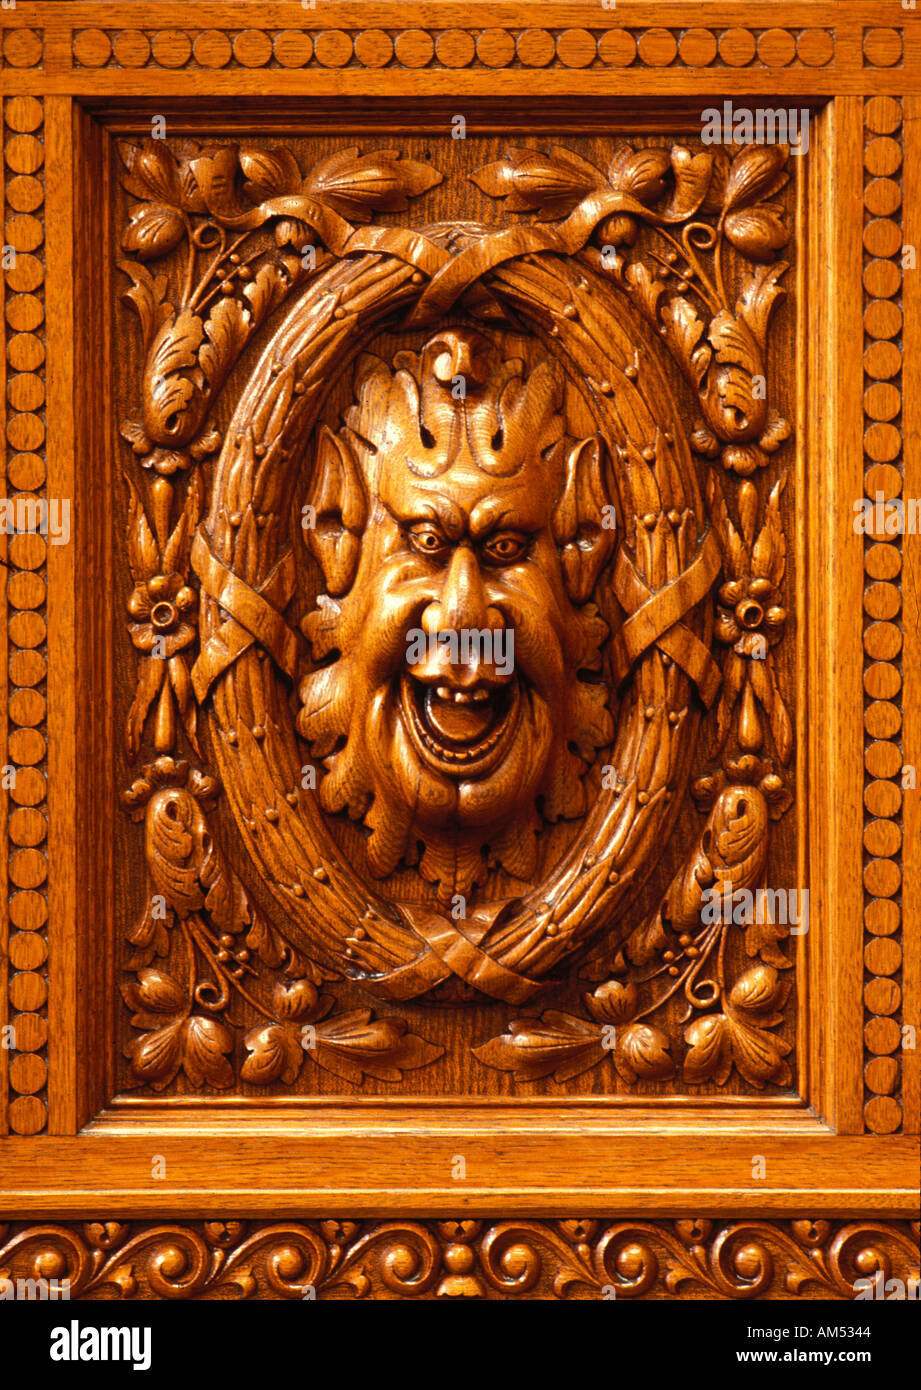 Comical and humorous wooden carved face bas relief wood panel Stock Photo